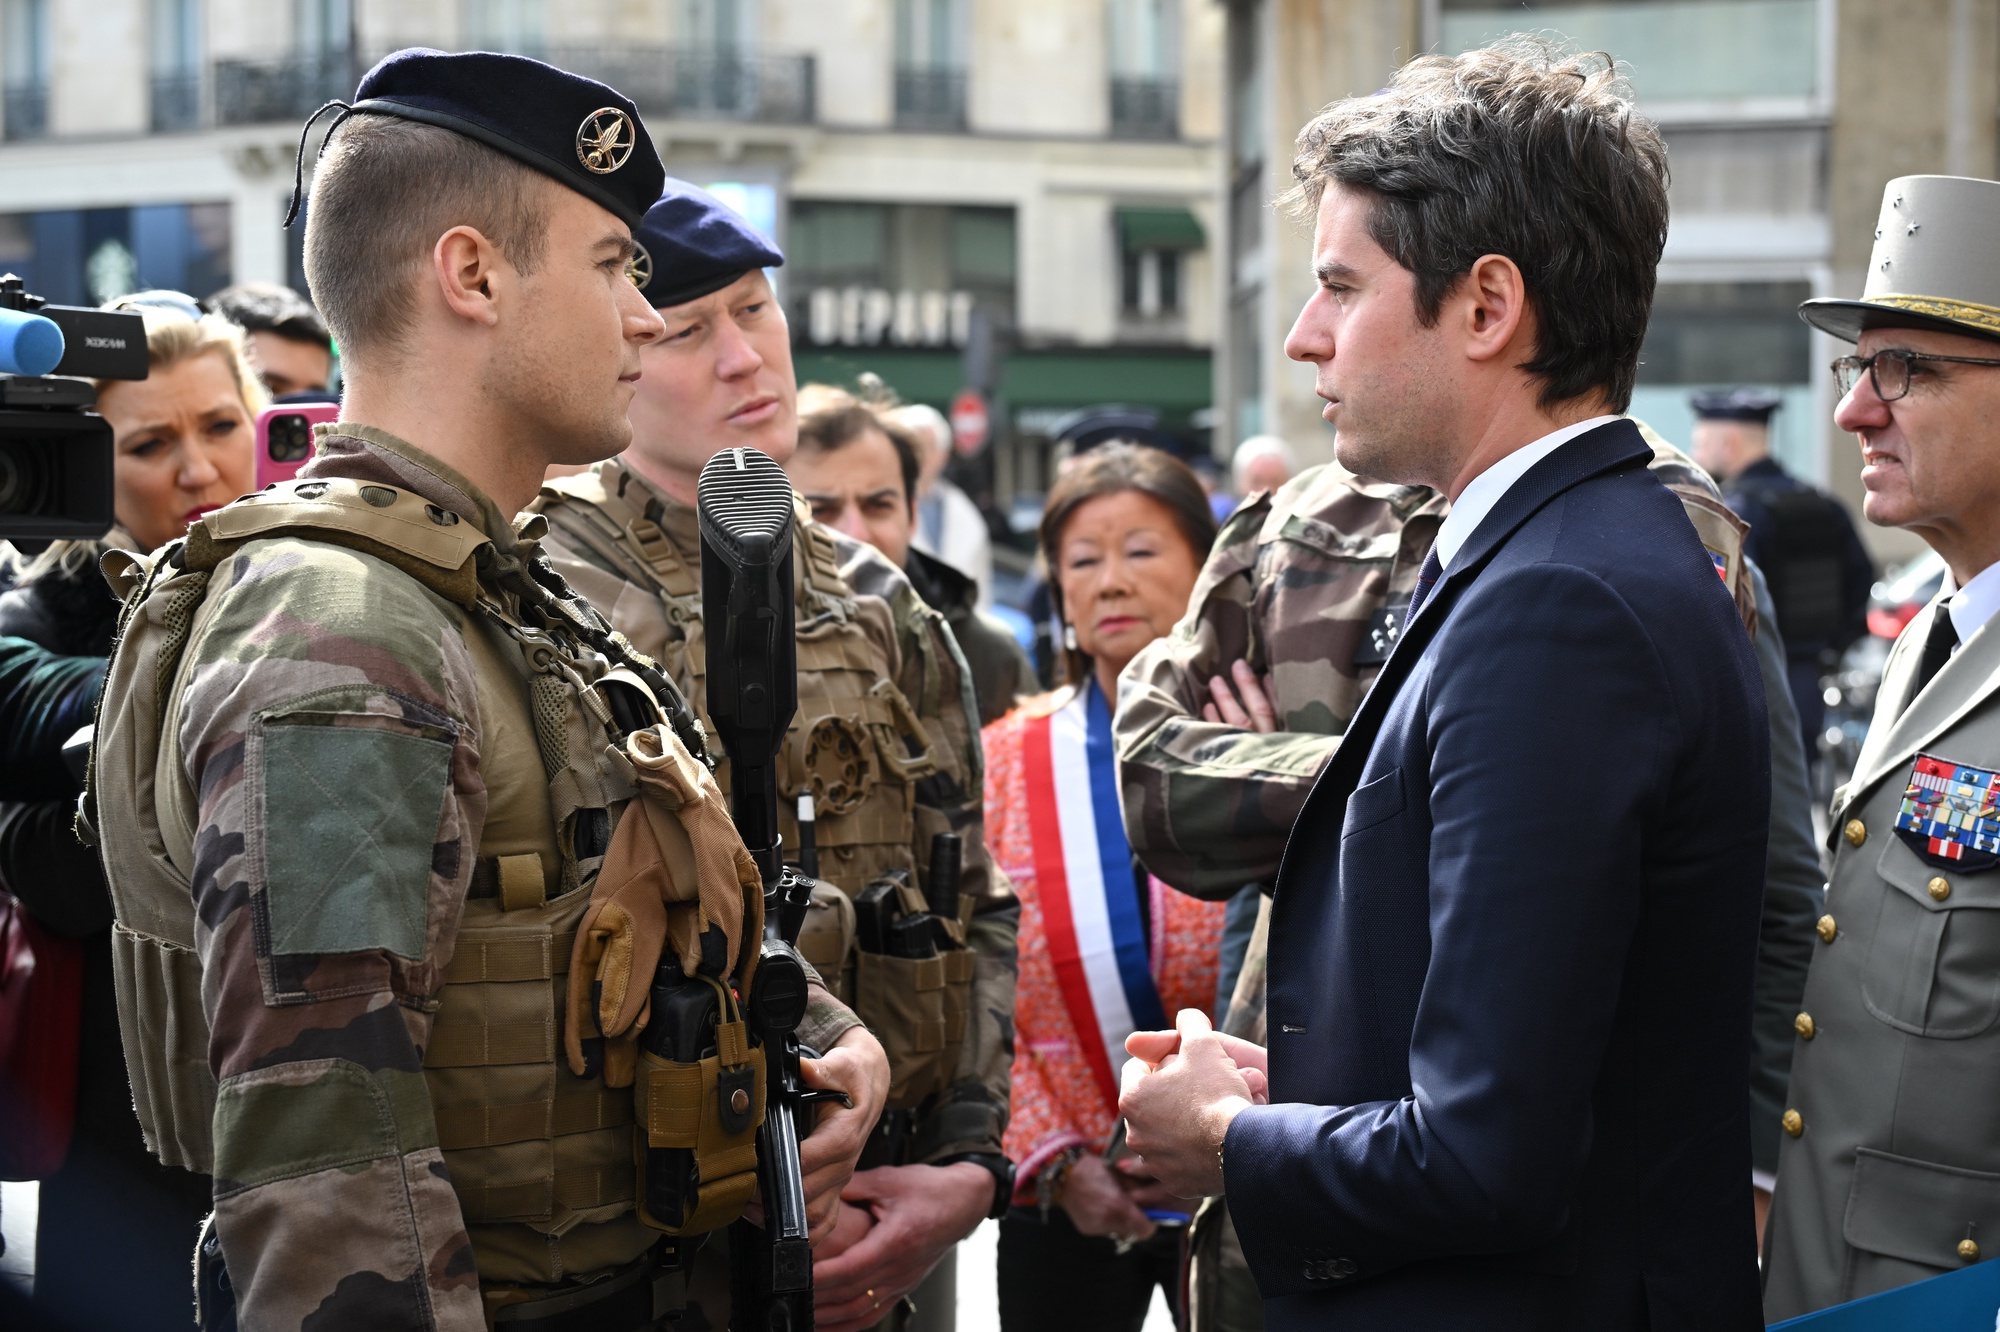 epa11243139 French Prime Minister Gabriel Attal (R) speaks with French soldiers of the Sentinelle security operation during a visit to the Saint-Lazare railway station in Paris, France, 25 March 2024. Four months ahead of the Paris 2024 Olympic Games, French authorities have raised the terror alert level to the highest level for following the terrorist attack on the Crocus City Hall in the Moscow region, Russia, for which the Islamic State (IS) group claimed responsibility.  EPA/BERTRAND GUAY / POOL  MAXPPP OUT